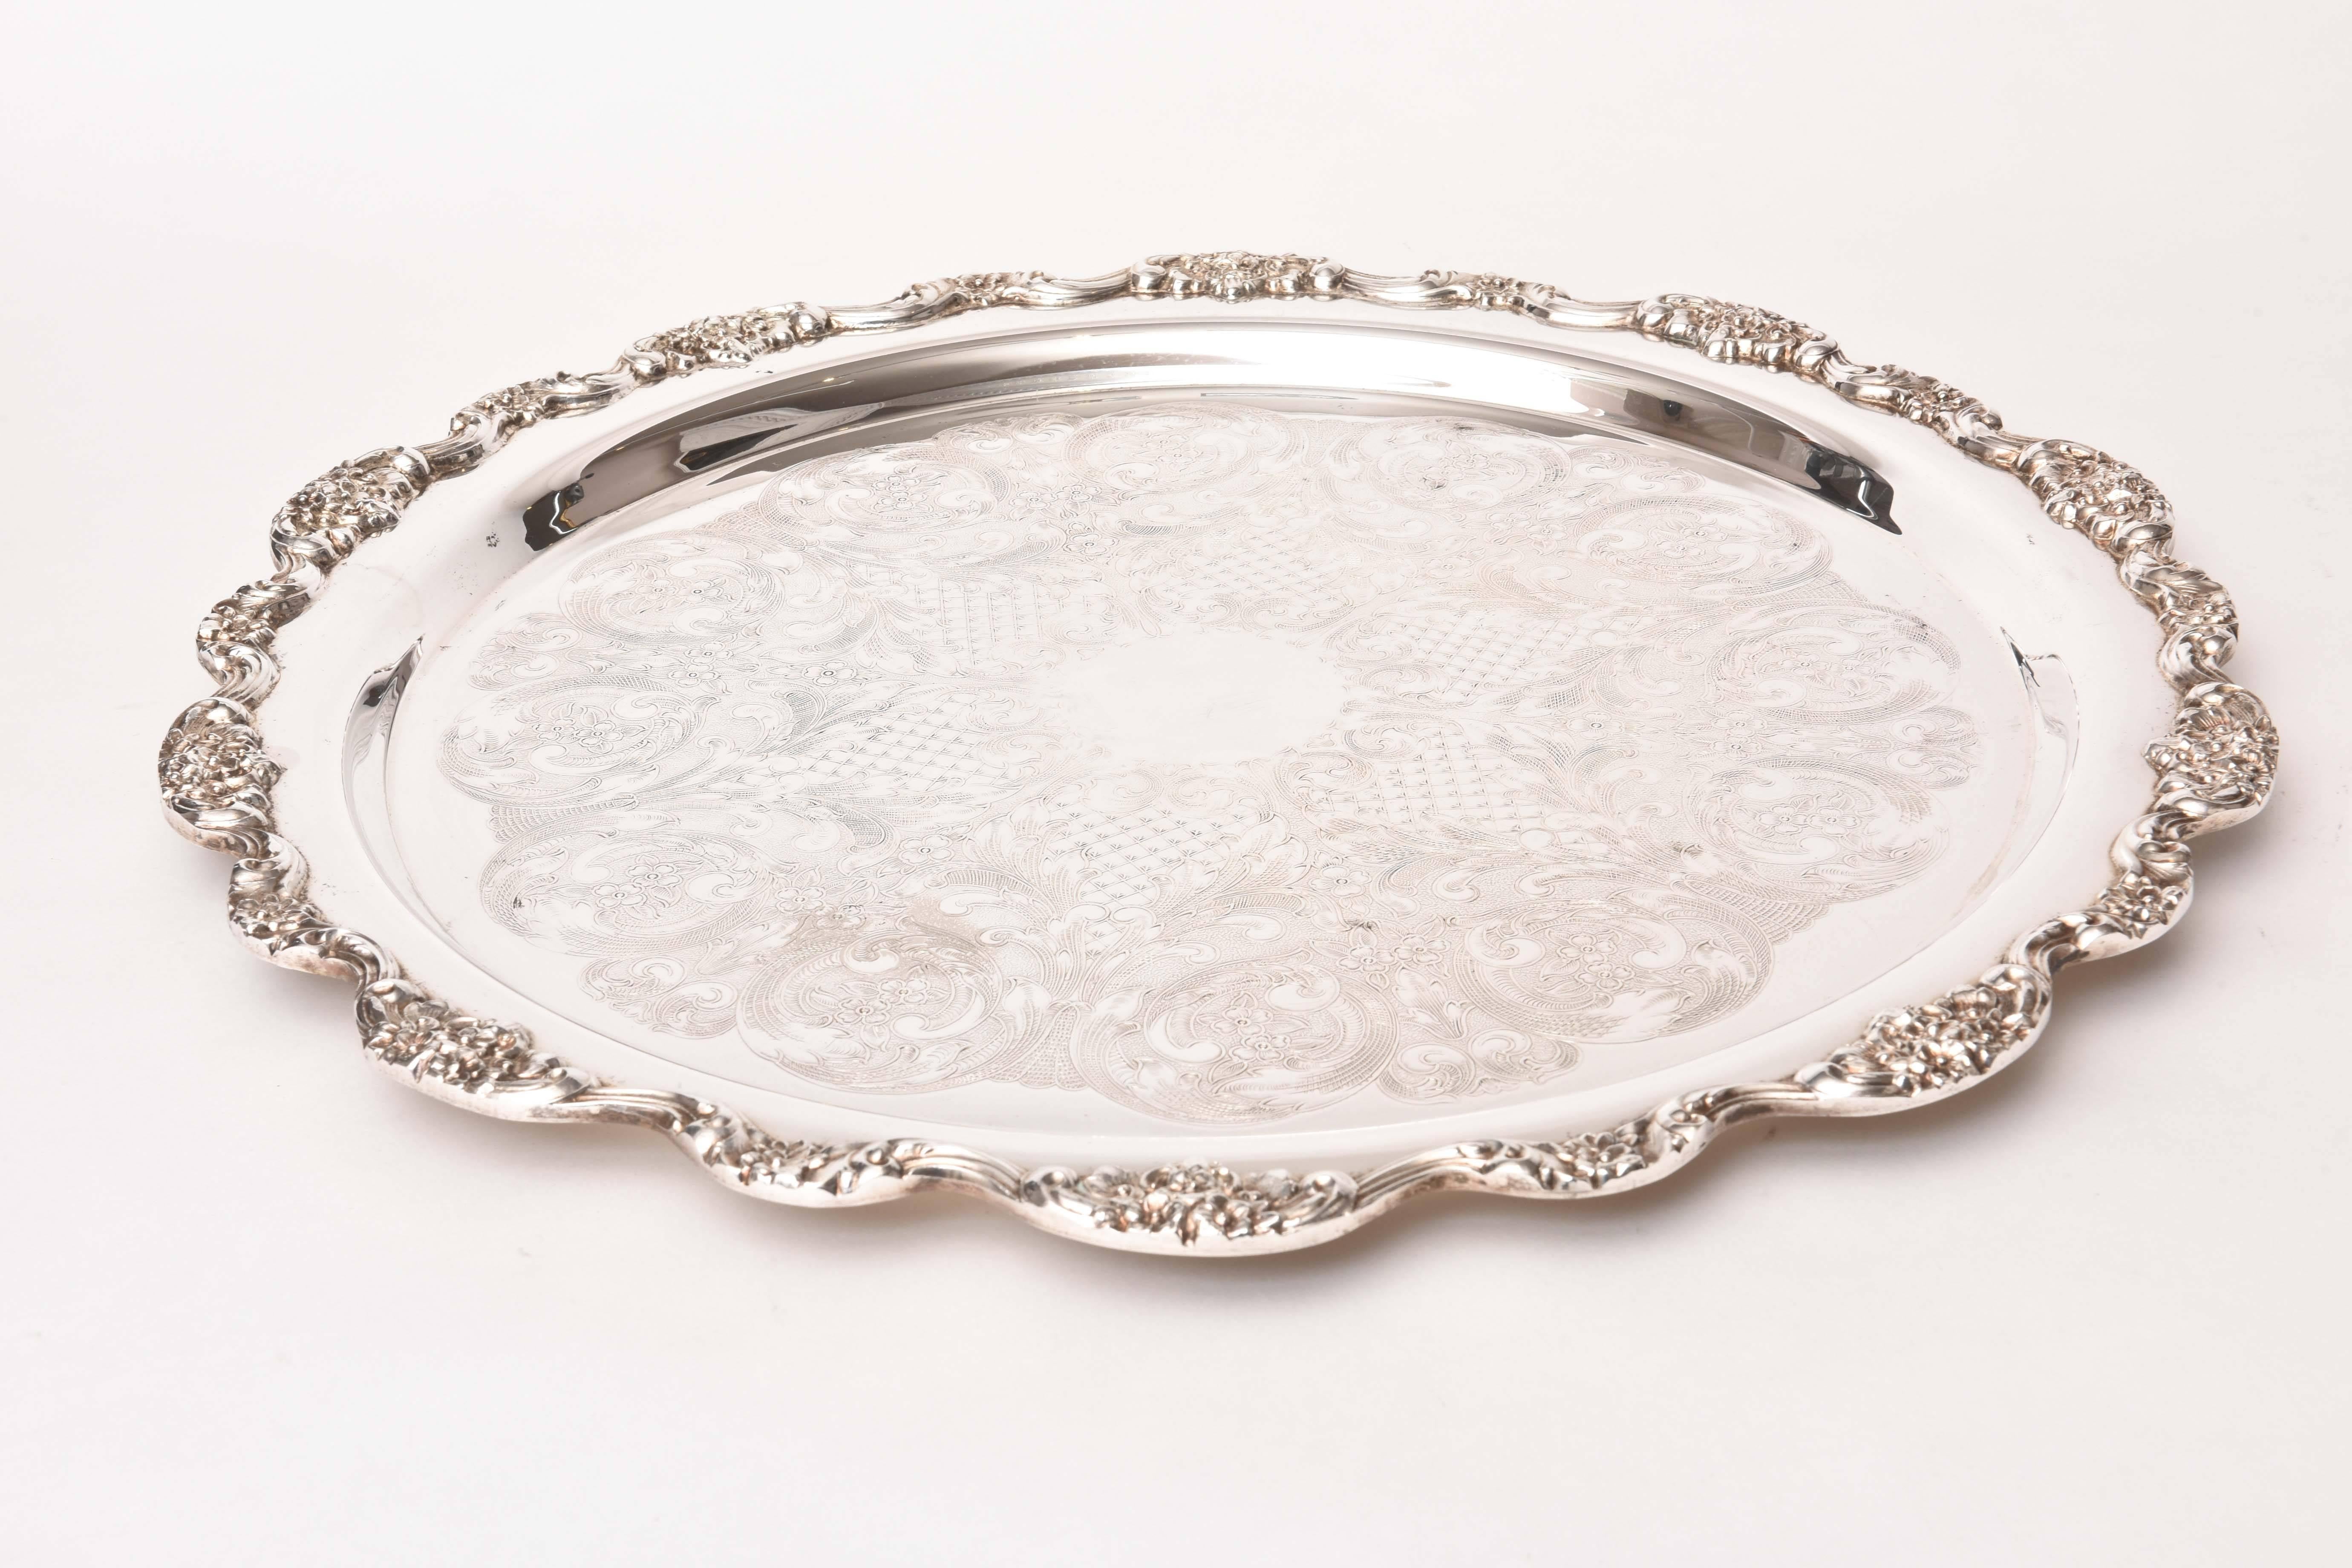 Impressive Silver Plate Punch Bowl and under Tray, American Vintage 1